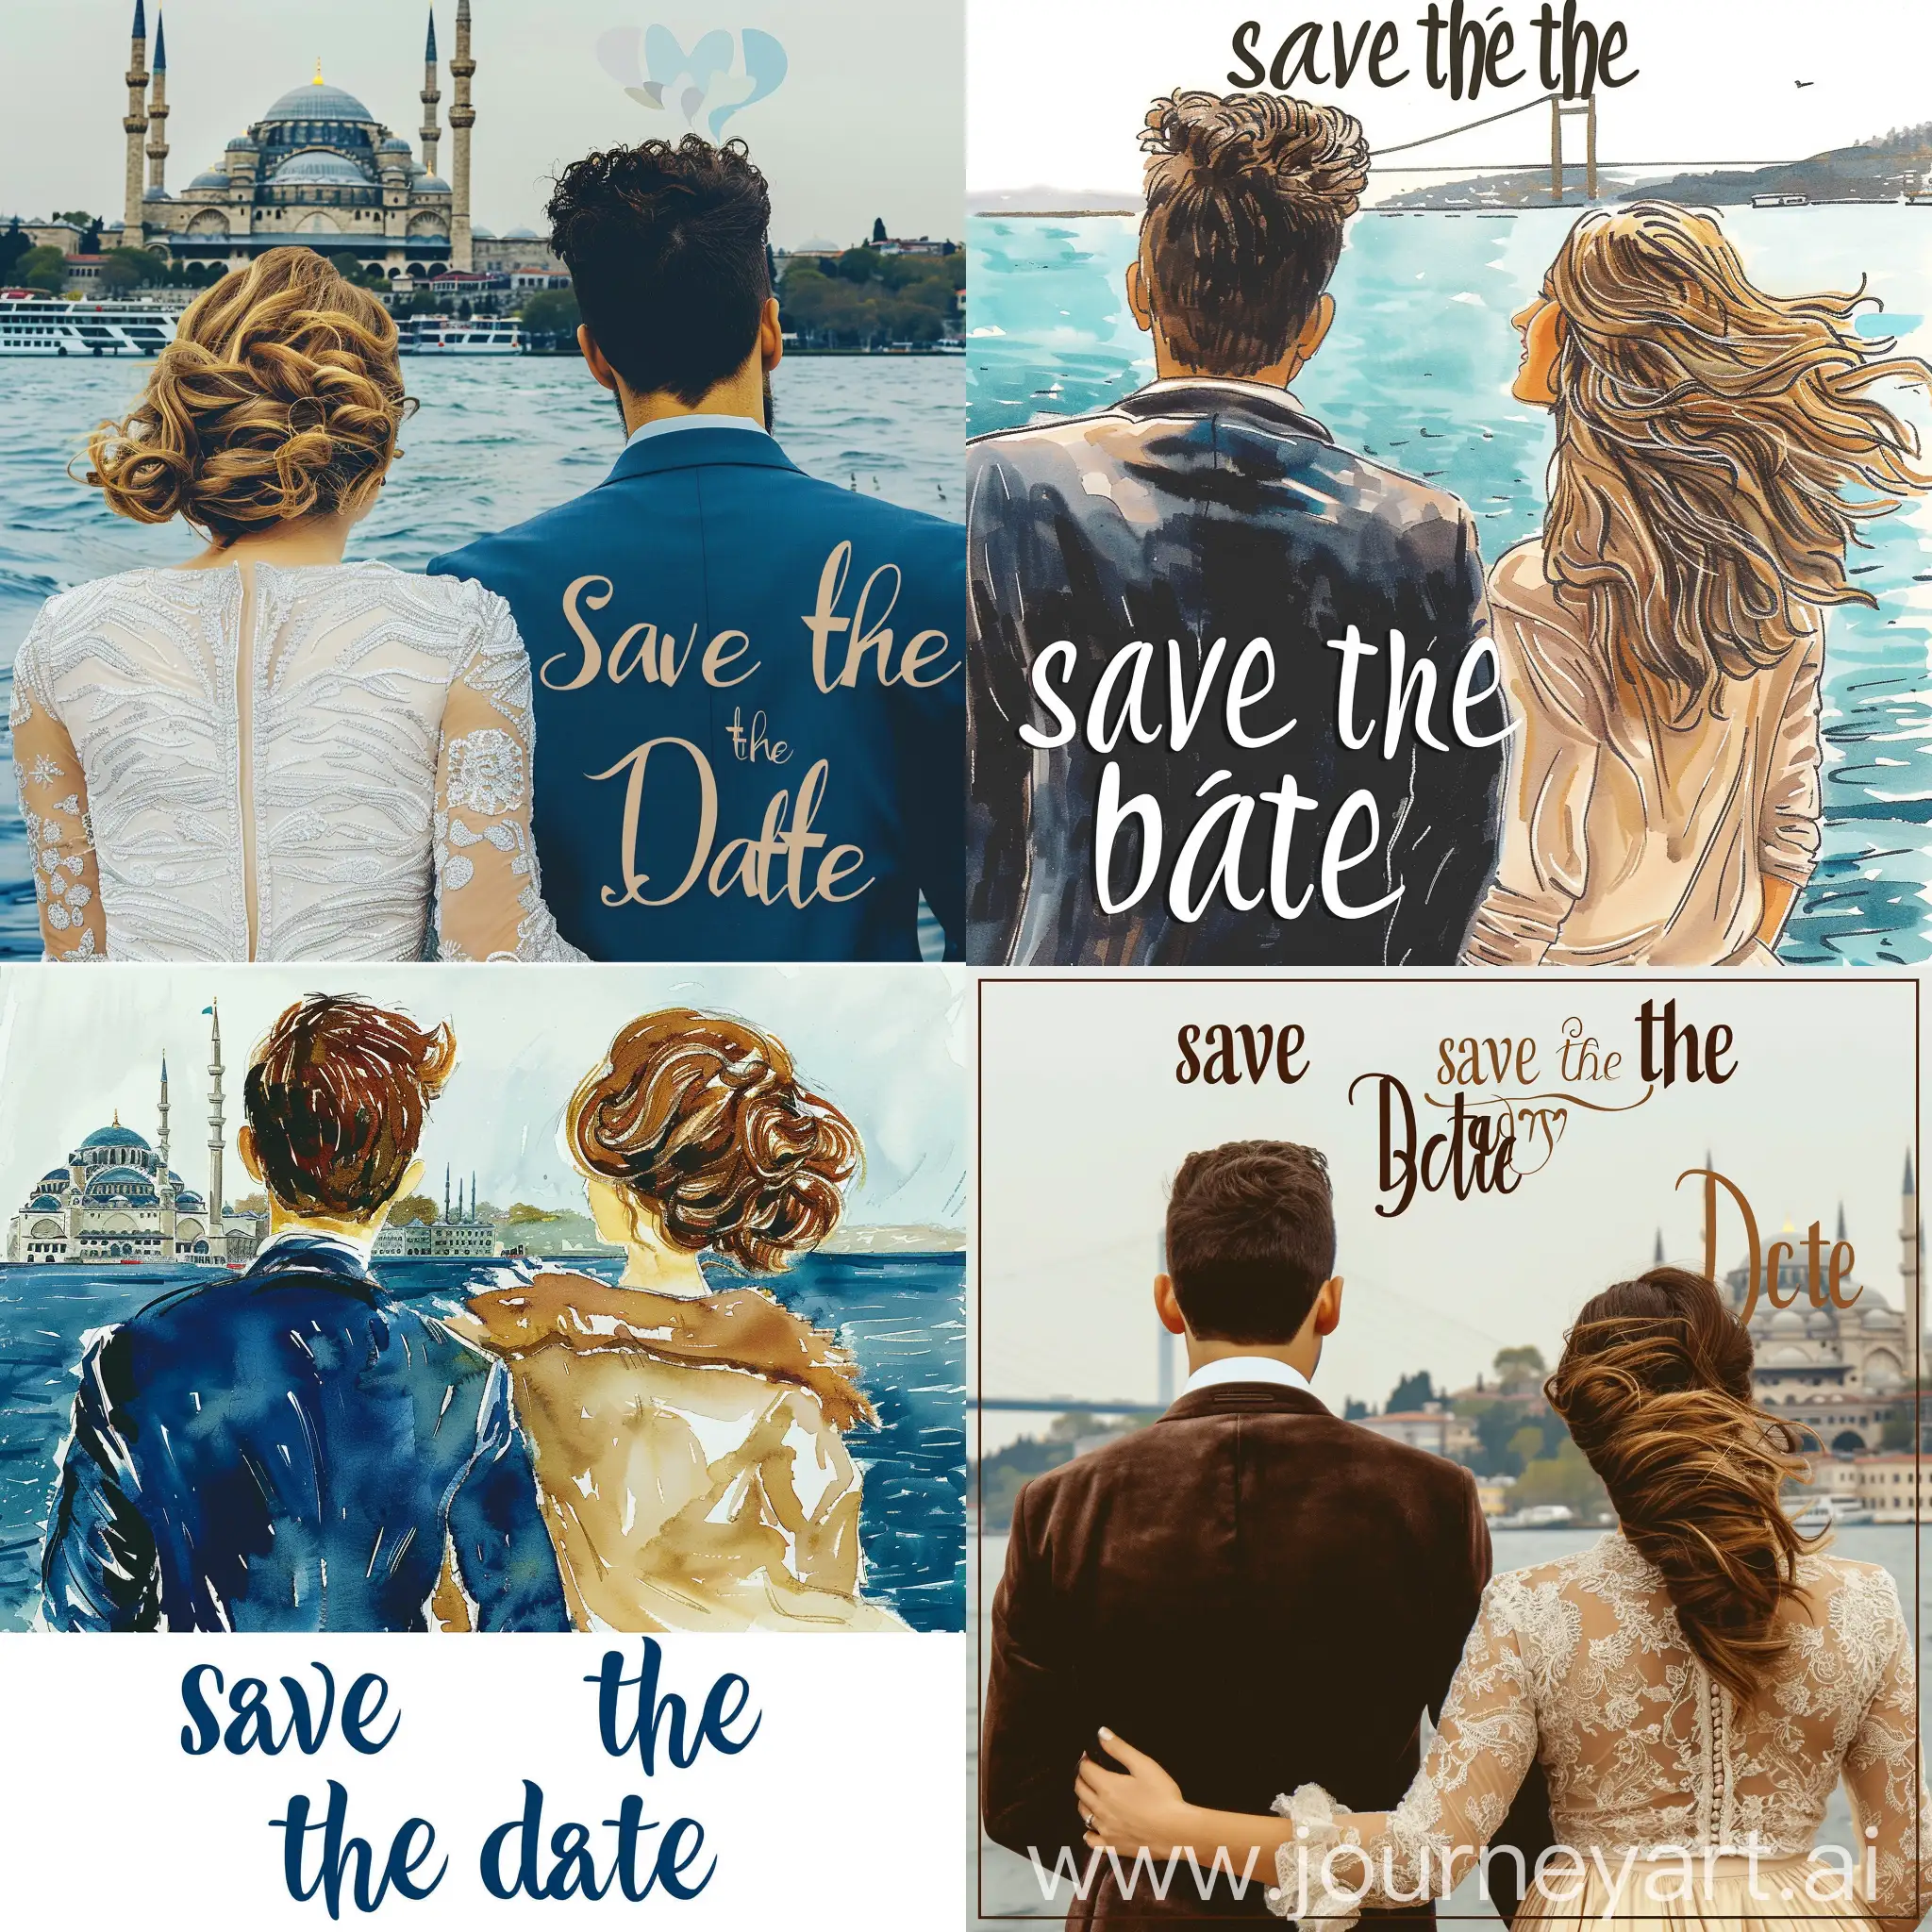 Create me an image of a man and a woman for a wedding and a “save the date” invitation that will be in the Bosphorus in istanbul turkey. Show only their backs and don’t include text